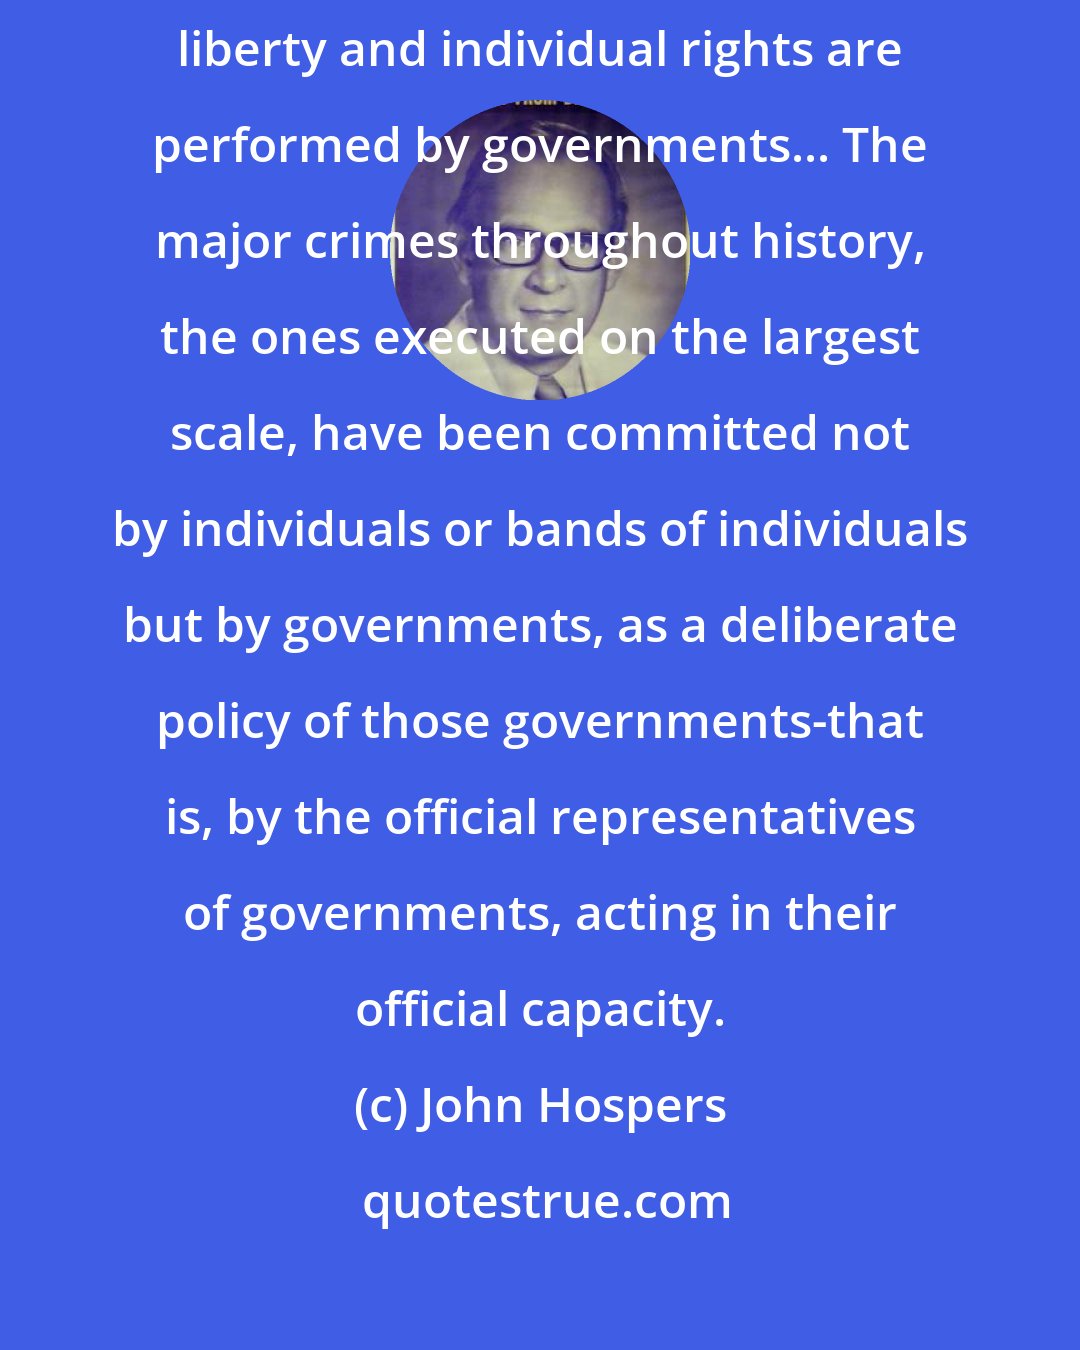 John Hospers: By far the most numerous and most flagrant violations of personal liberty and individual rights are performed by governments... The major crimes throughout history, the ones executed on the largest scale, have been committed not by individuals or bands of individuals but by governments, as a deliberate policy of those governments-that is, by the official representatives of governments, acting in their official capacity.